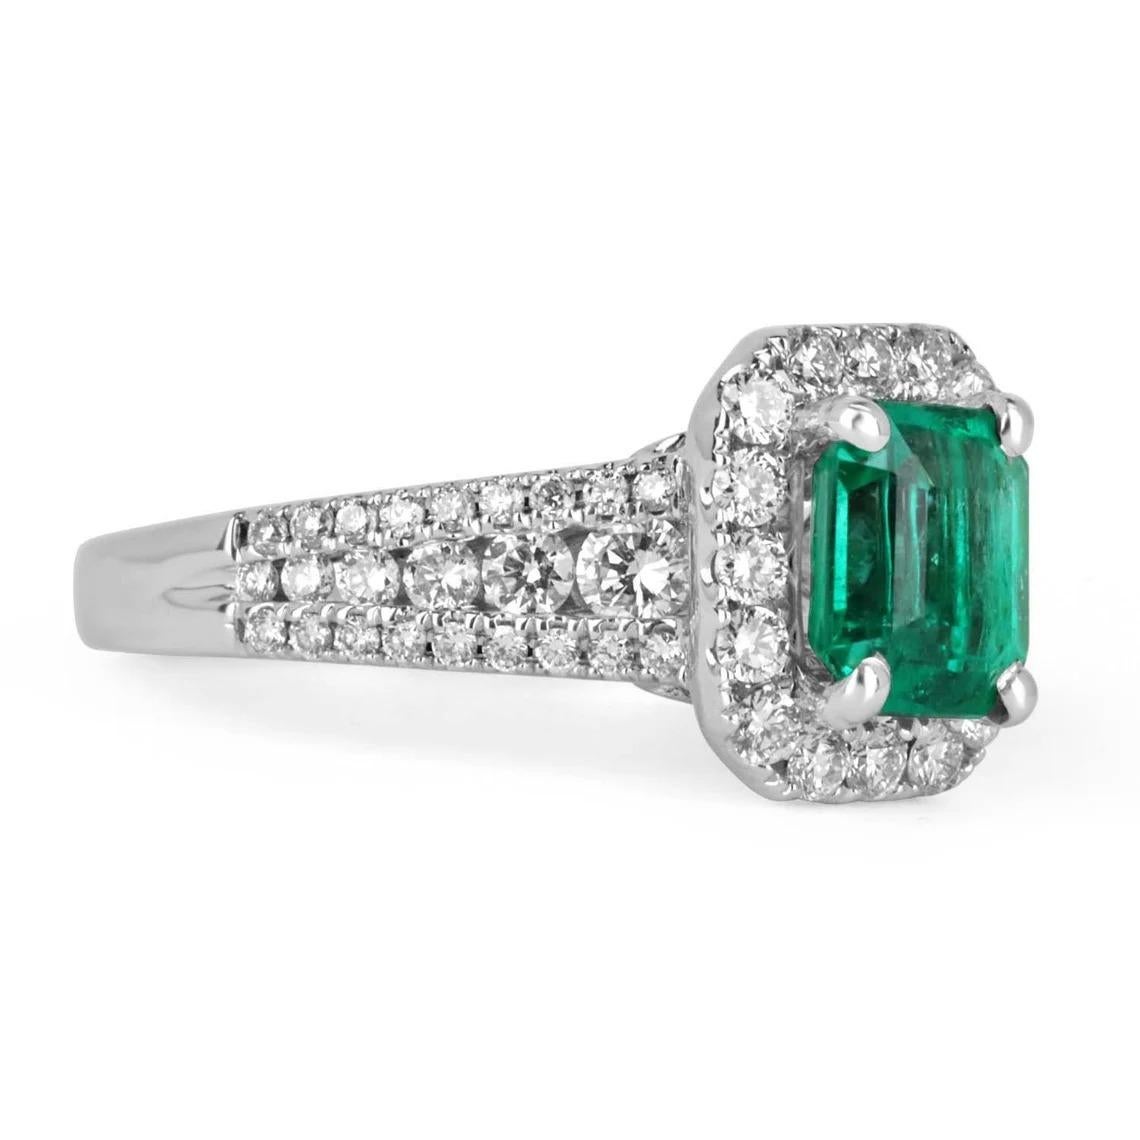 Elegantly displayed is a fine quality, Colombian emerald, and diamond halo engagement ring. The center gem is a high-quality emerald cut emerald filled with life and brilliance! Among the impressive qualities of the emerald, bluish-green color and